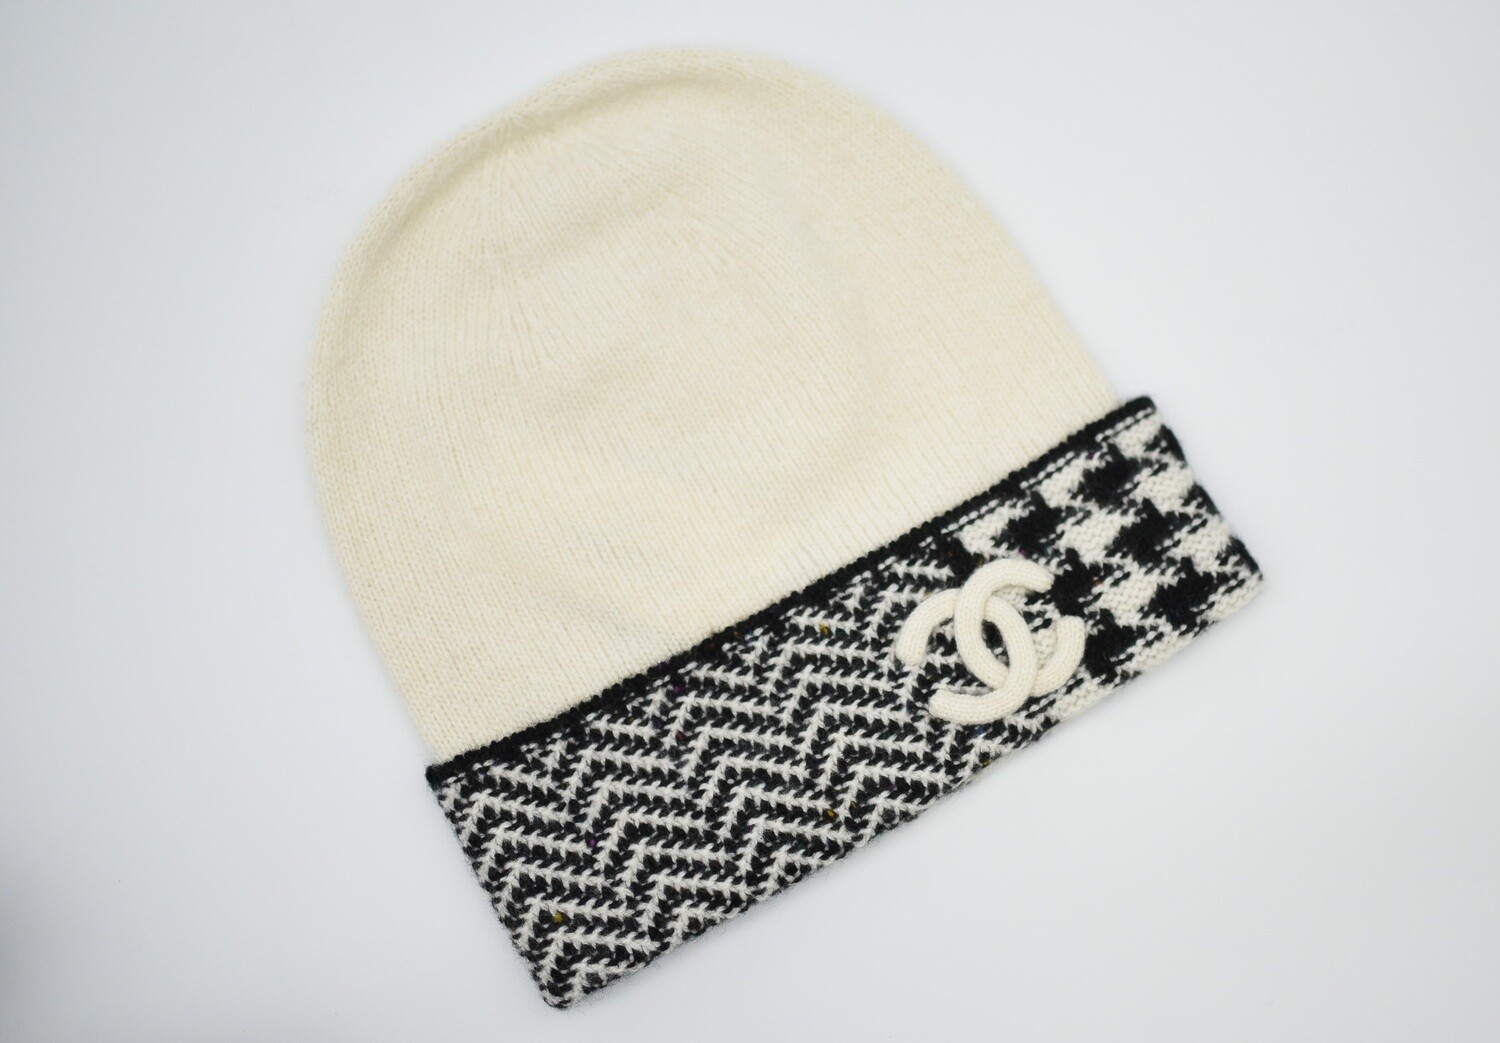 Chanel Beanie Hat, White and Black, New in Box MA001